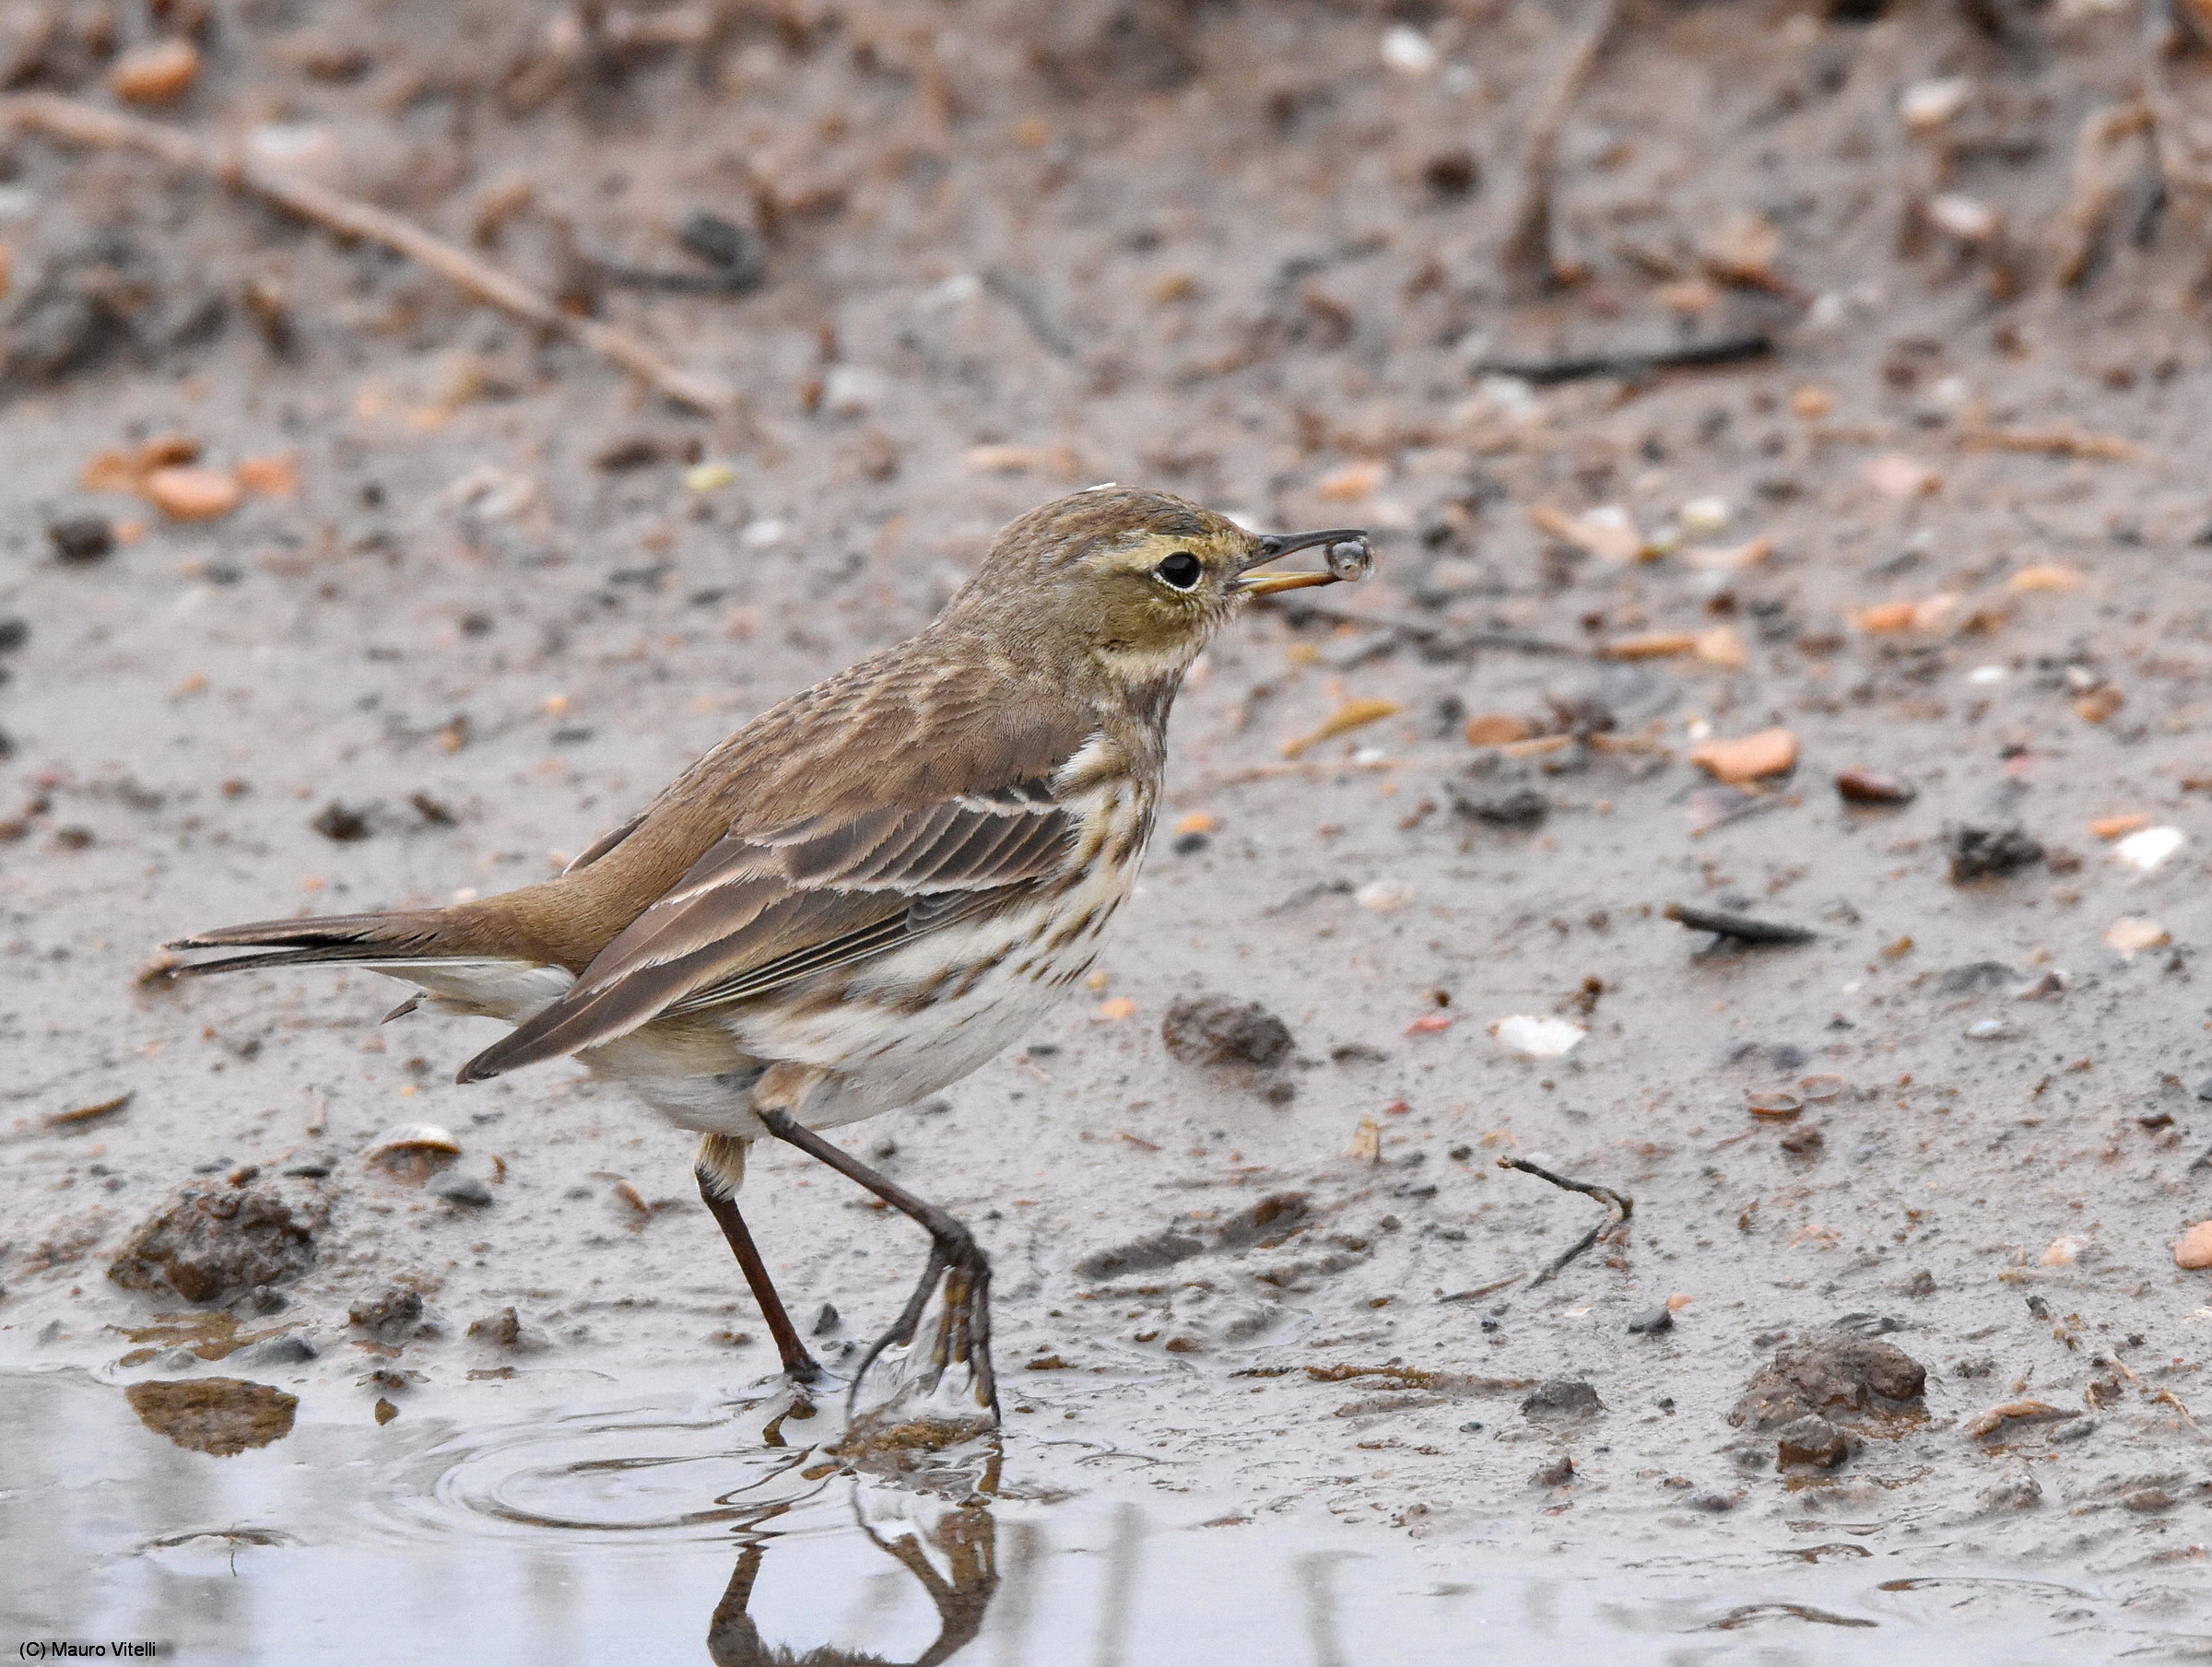 Pipit catching fish...